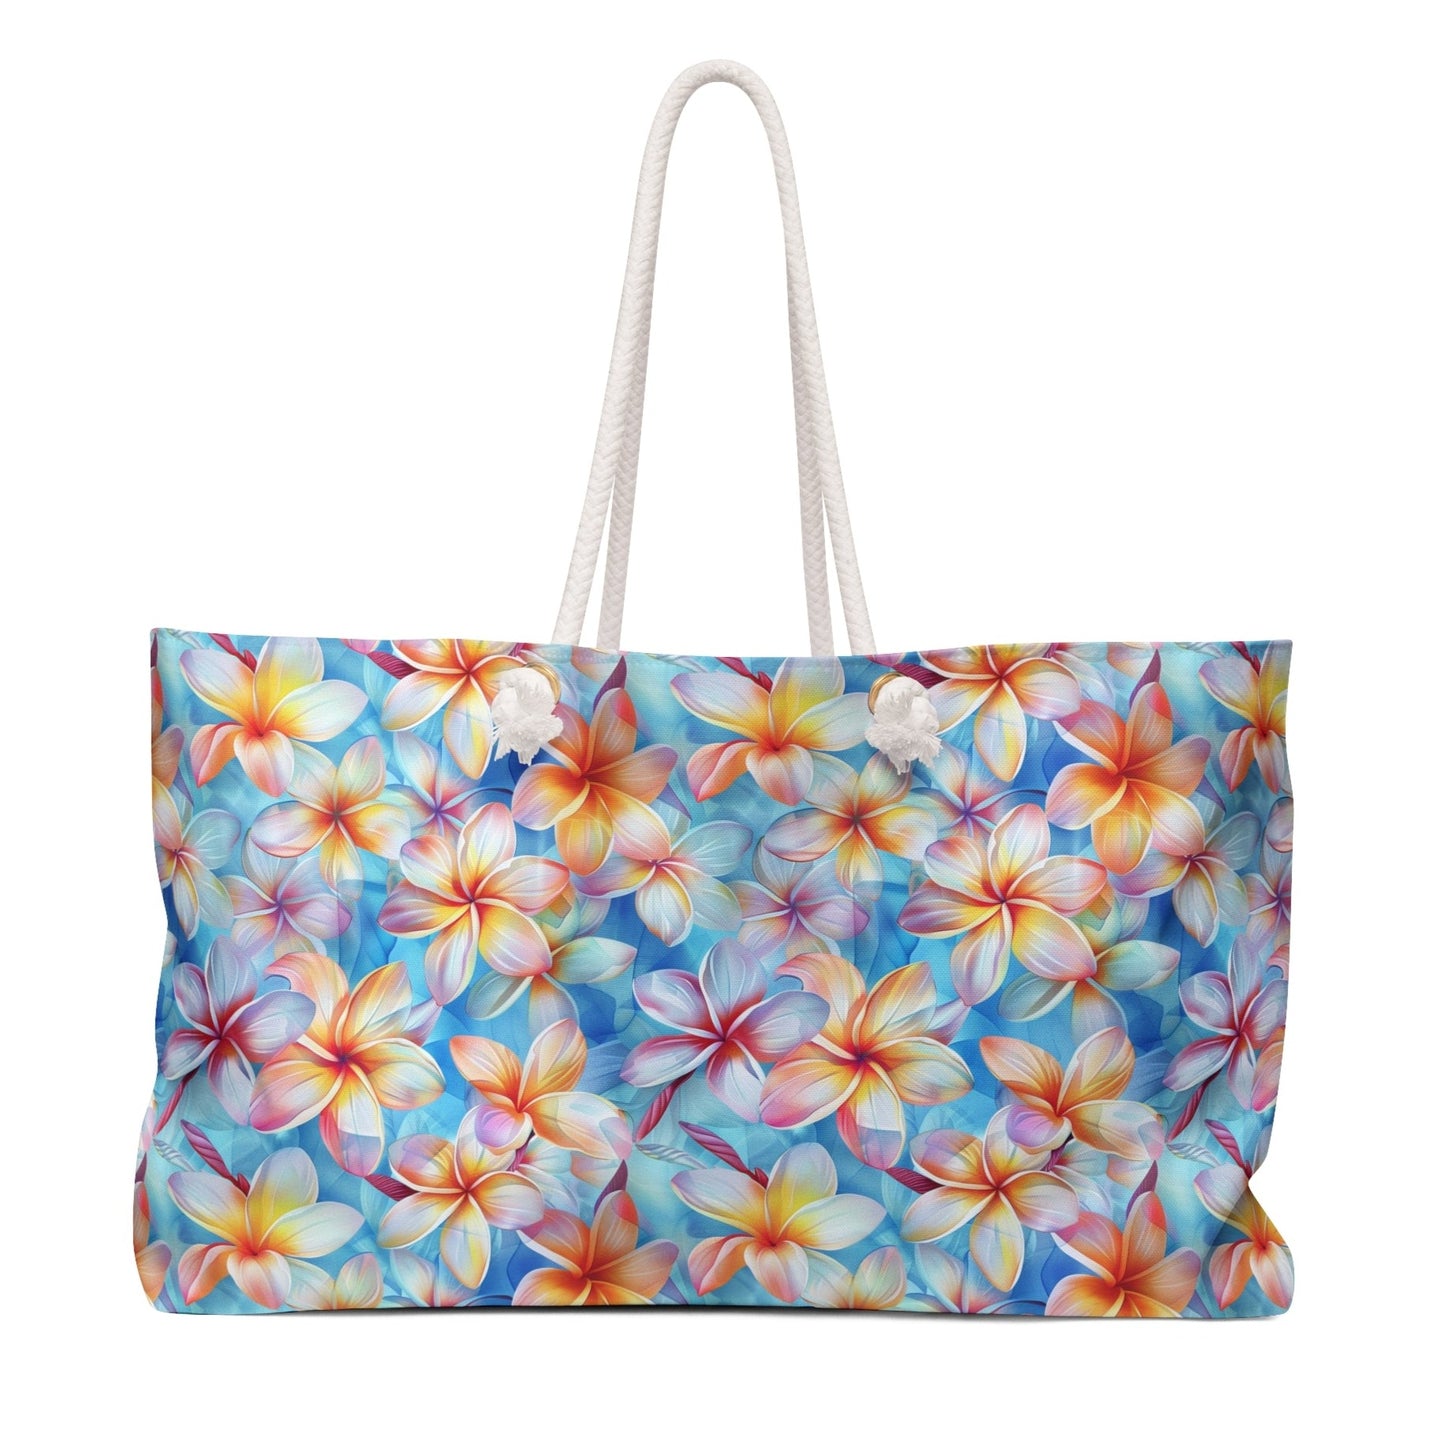 Deluxe Floral Tote & Beach Bag with Liberty Print Plumeria Design (24" × 13" x 5.5")